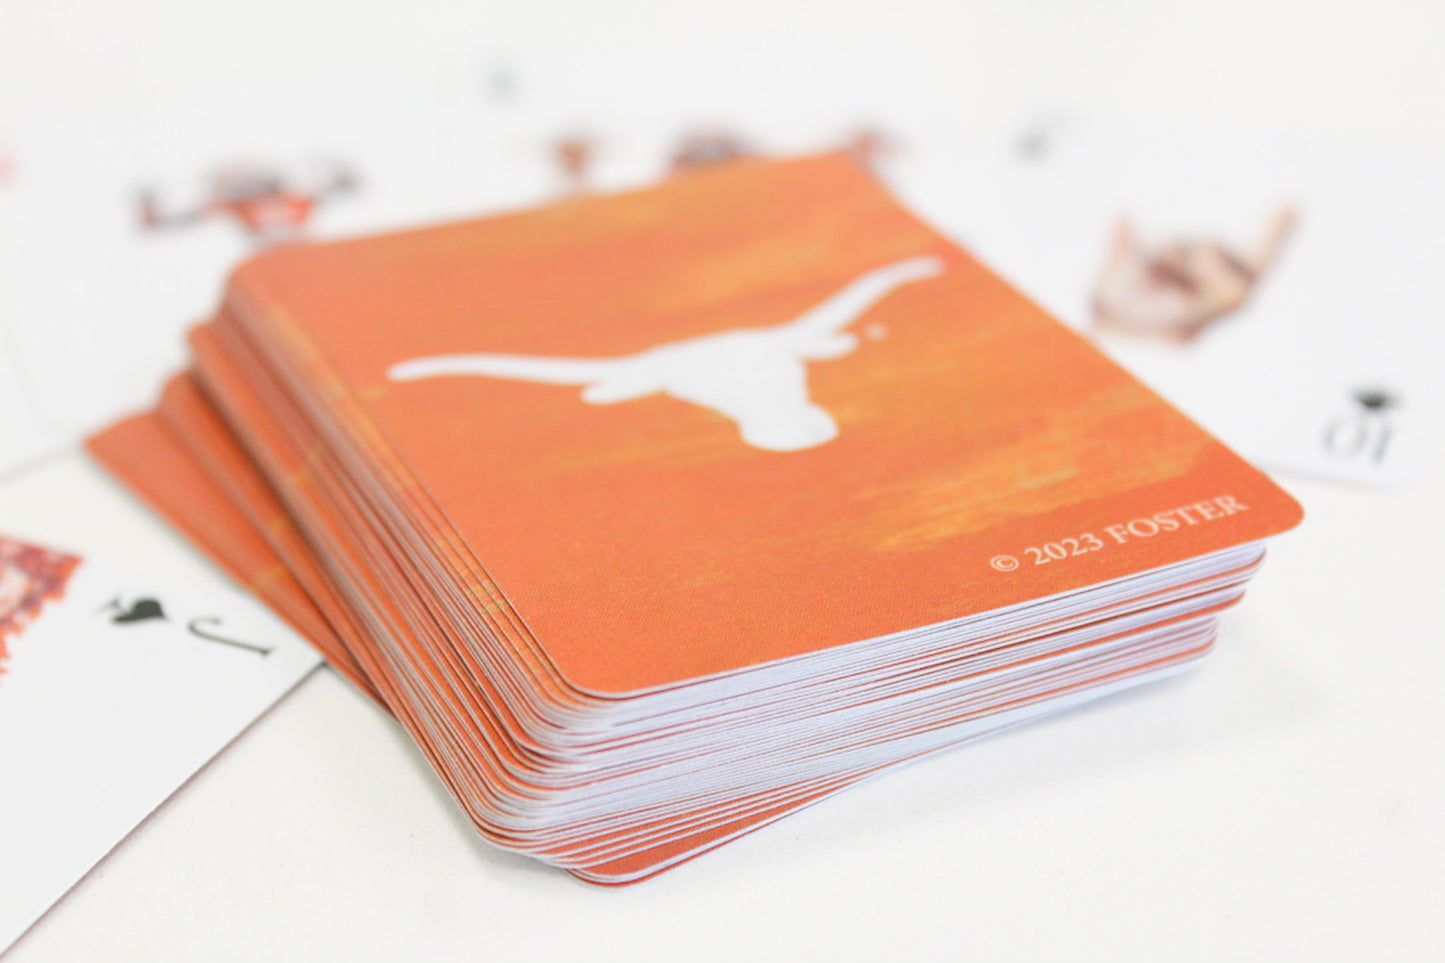 UT Austin playing cards. FOSTER.